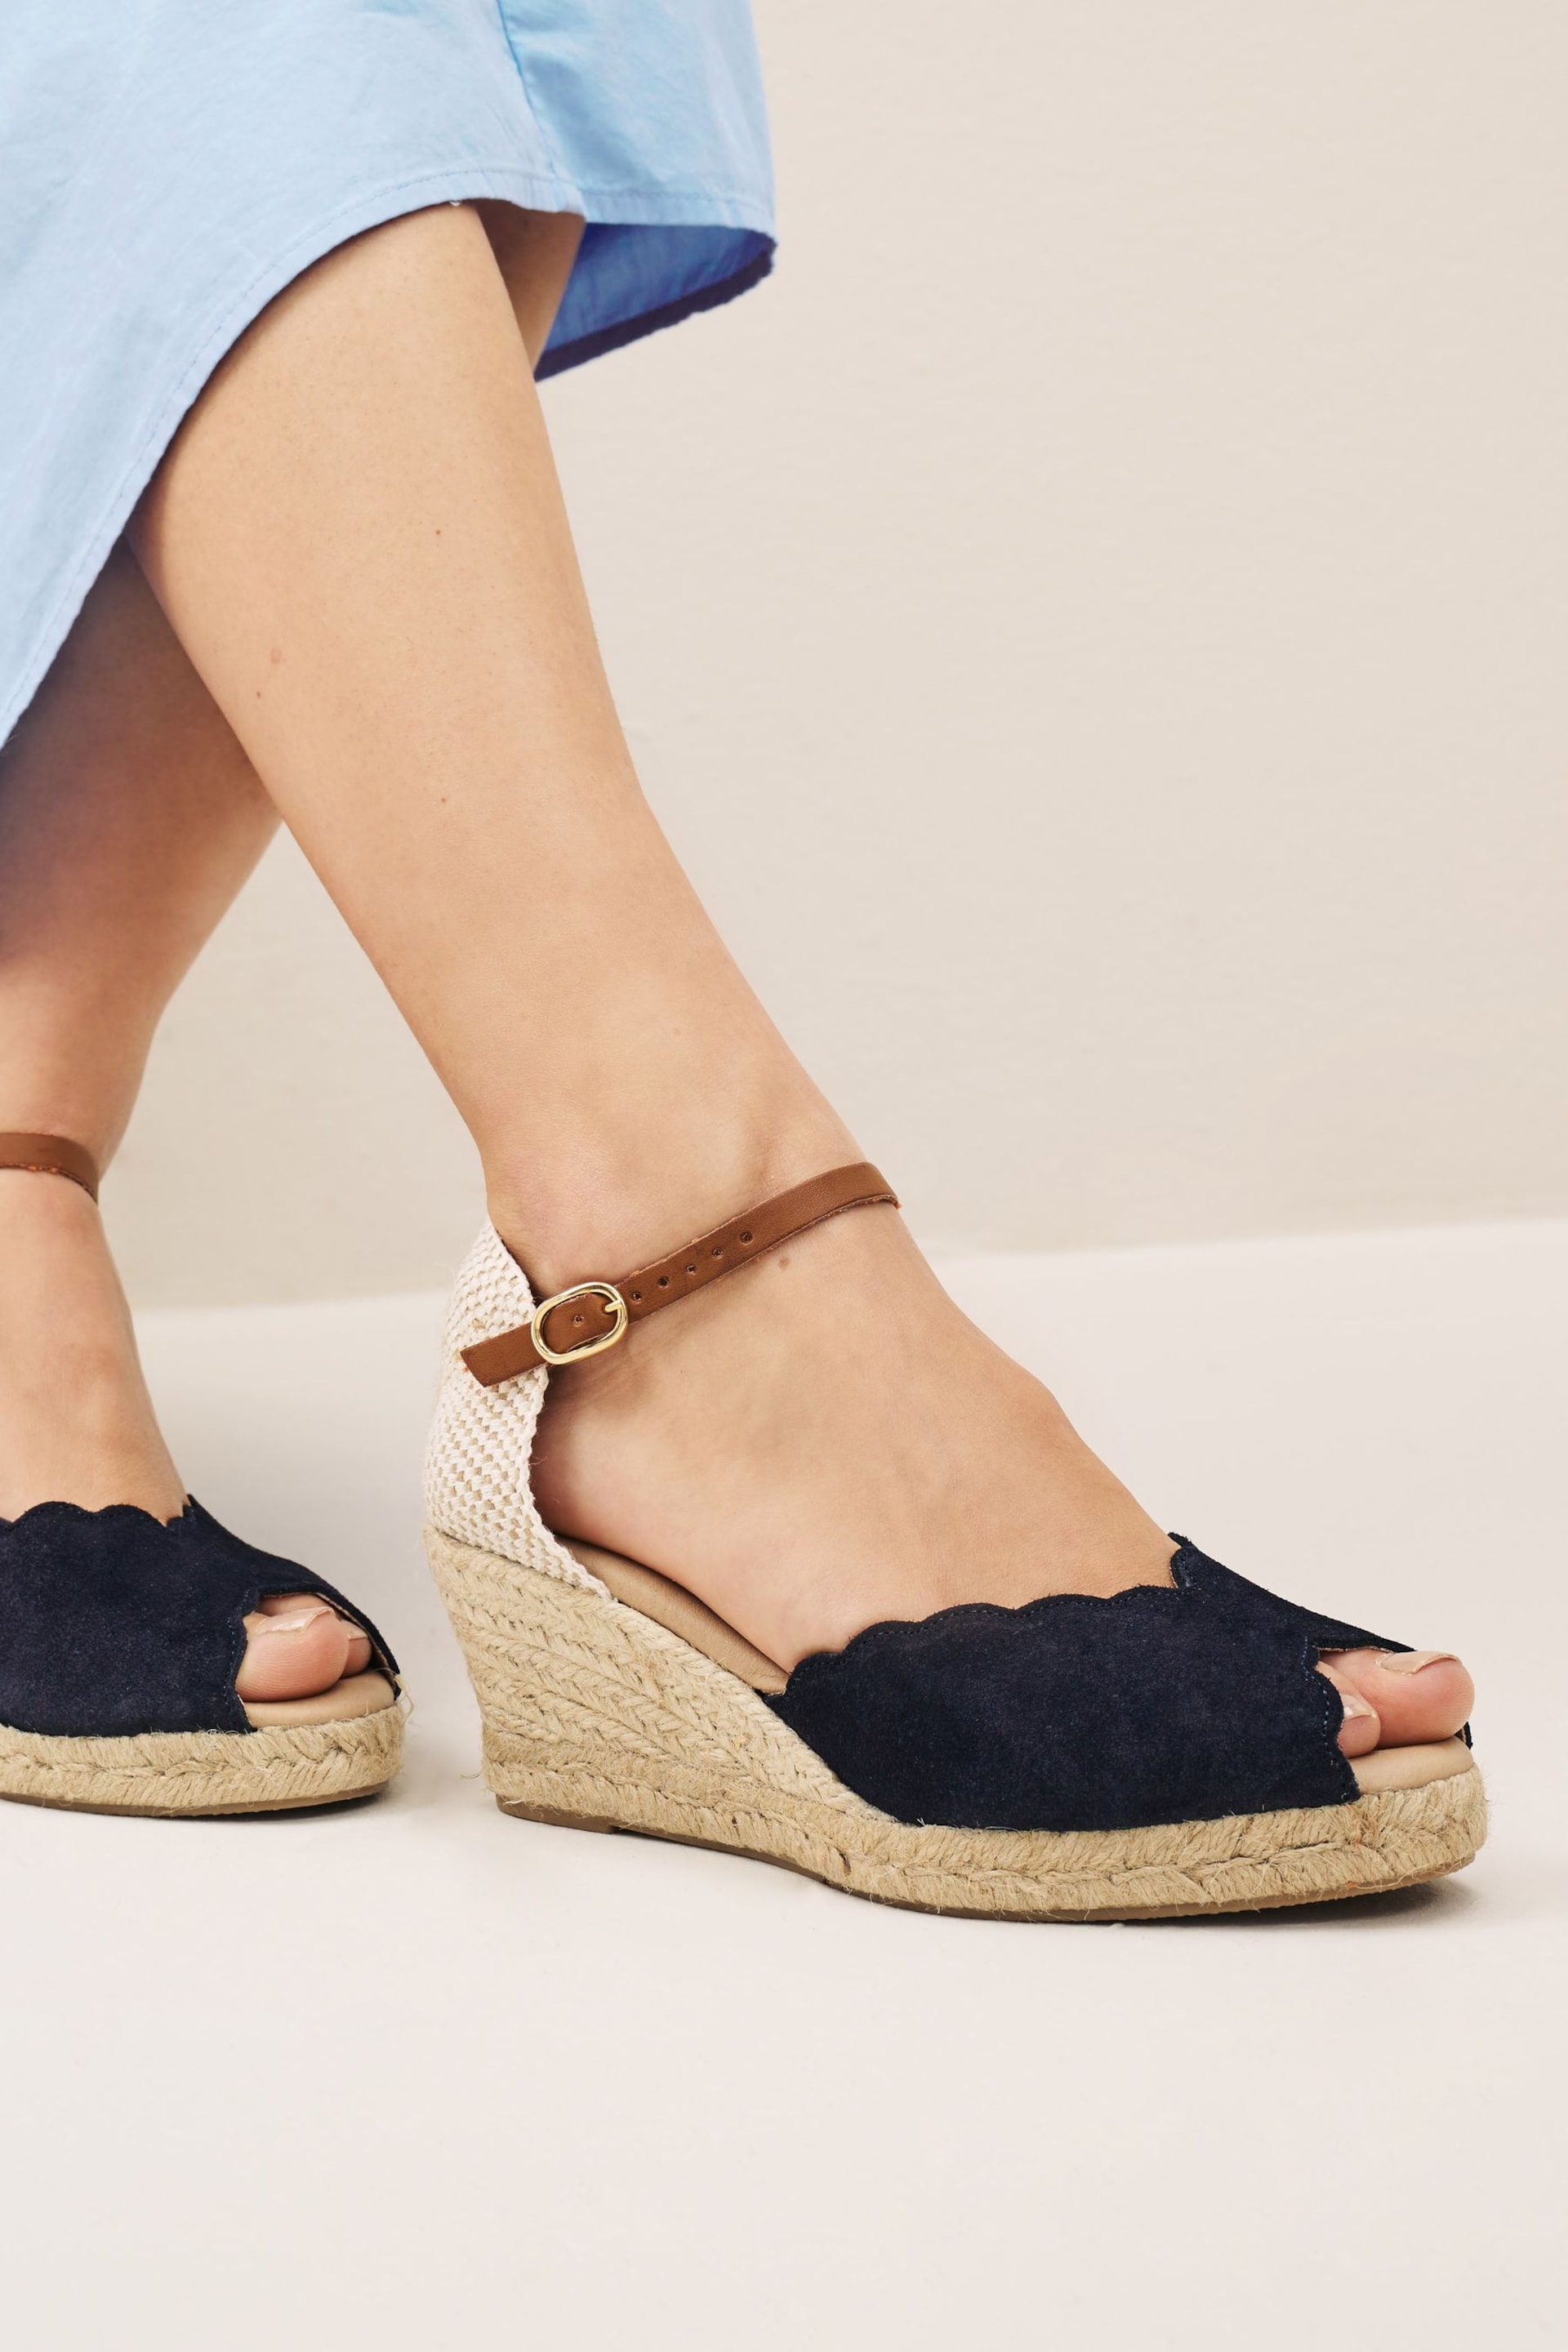 Navy Blue Scallop Peep Toe Wedges - Image 2 of 6